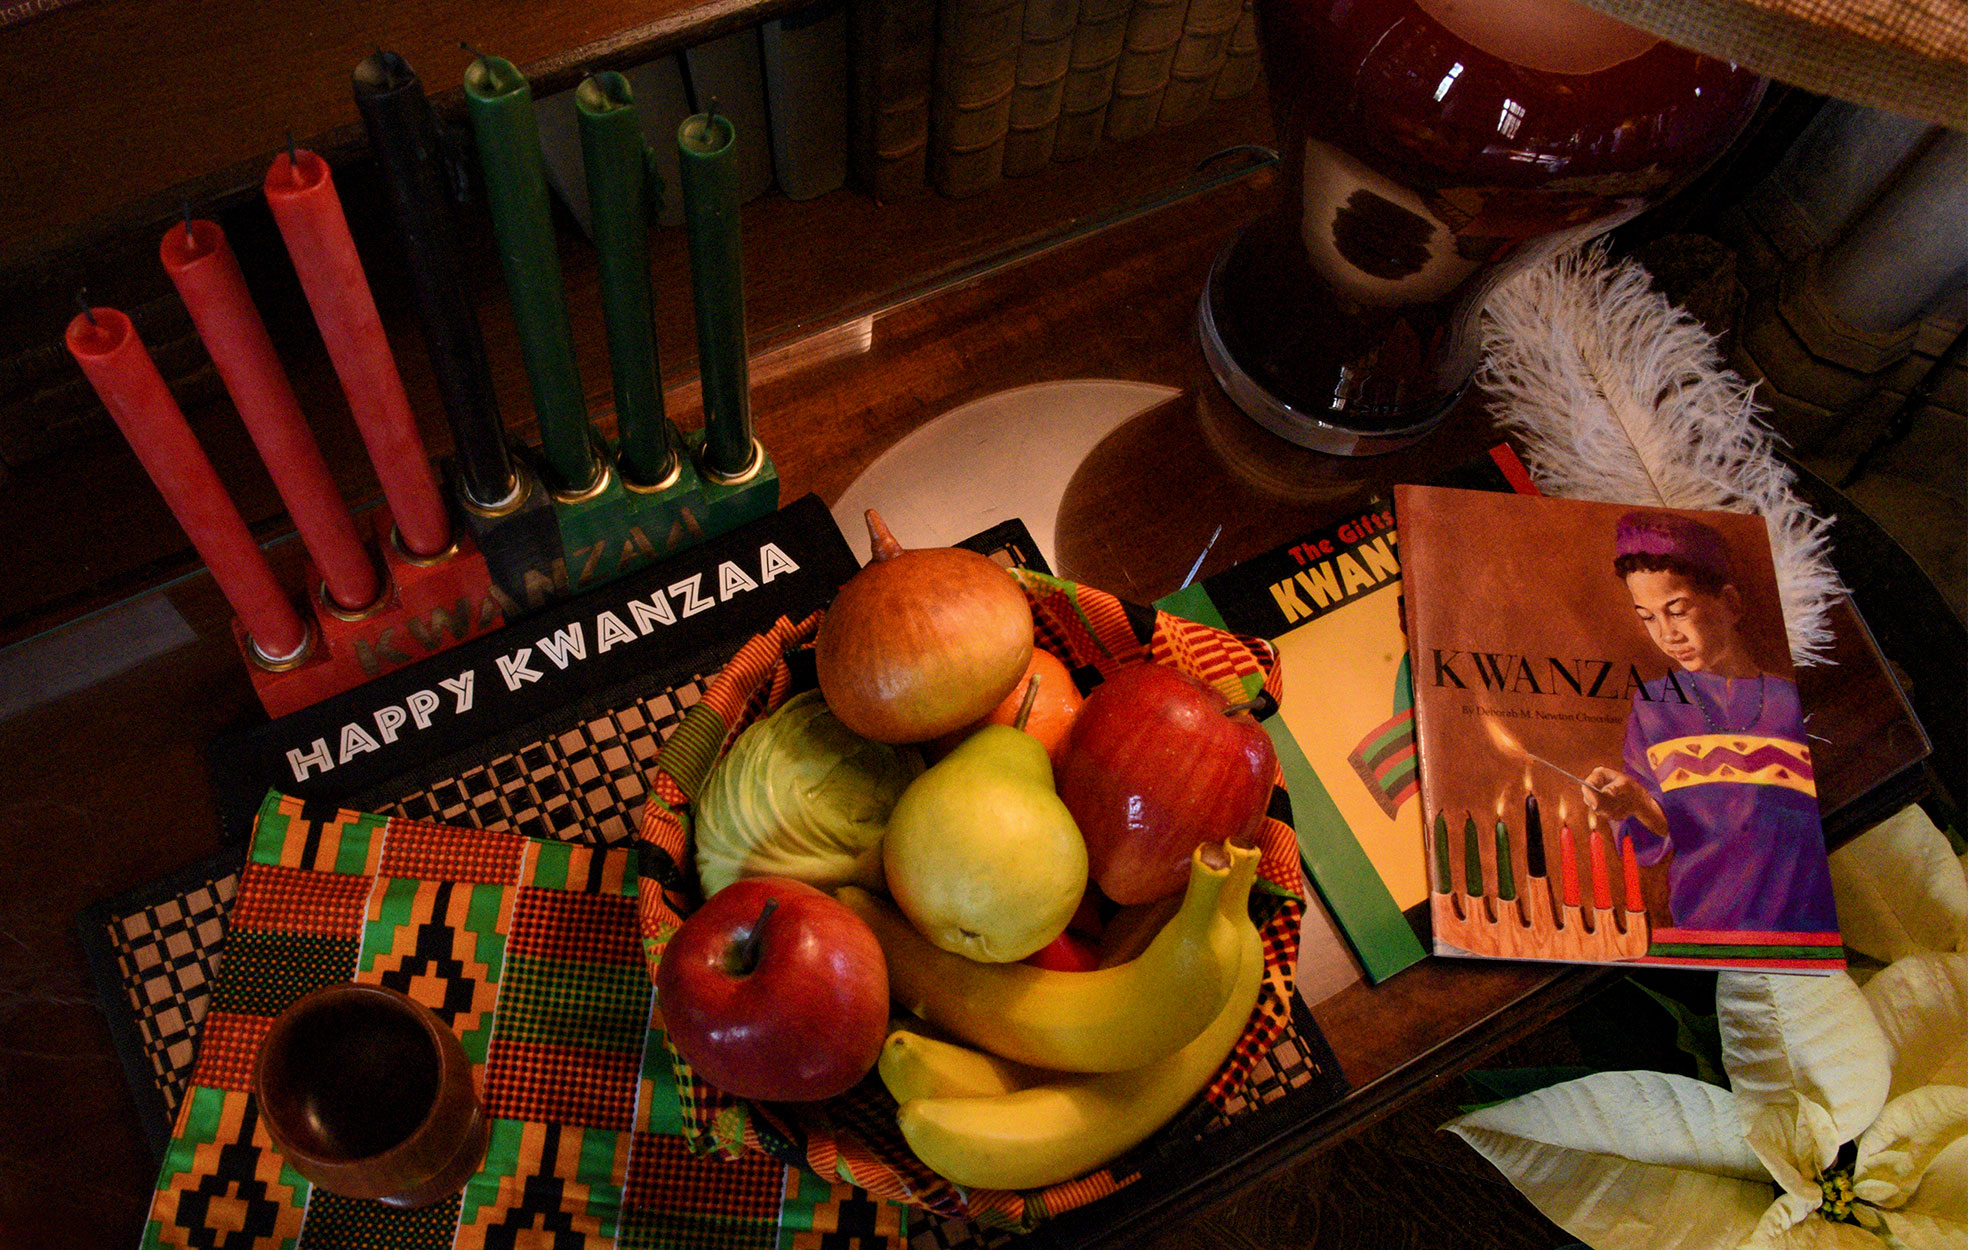 In the Library, a close view of a Kwanzaa display including fruit, traditional candles, books and a single feather.